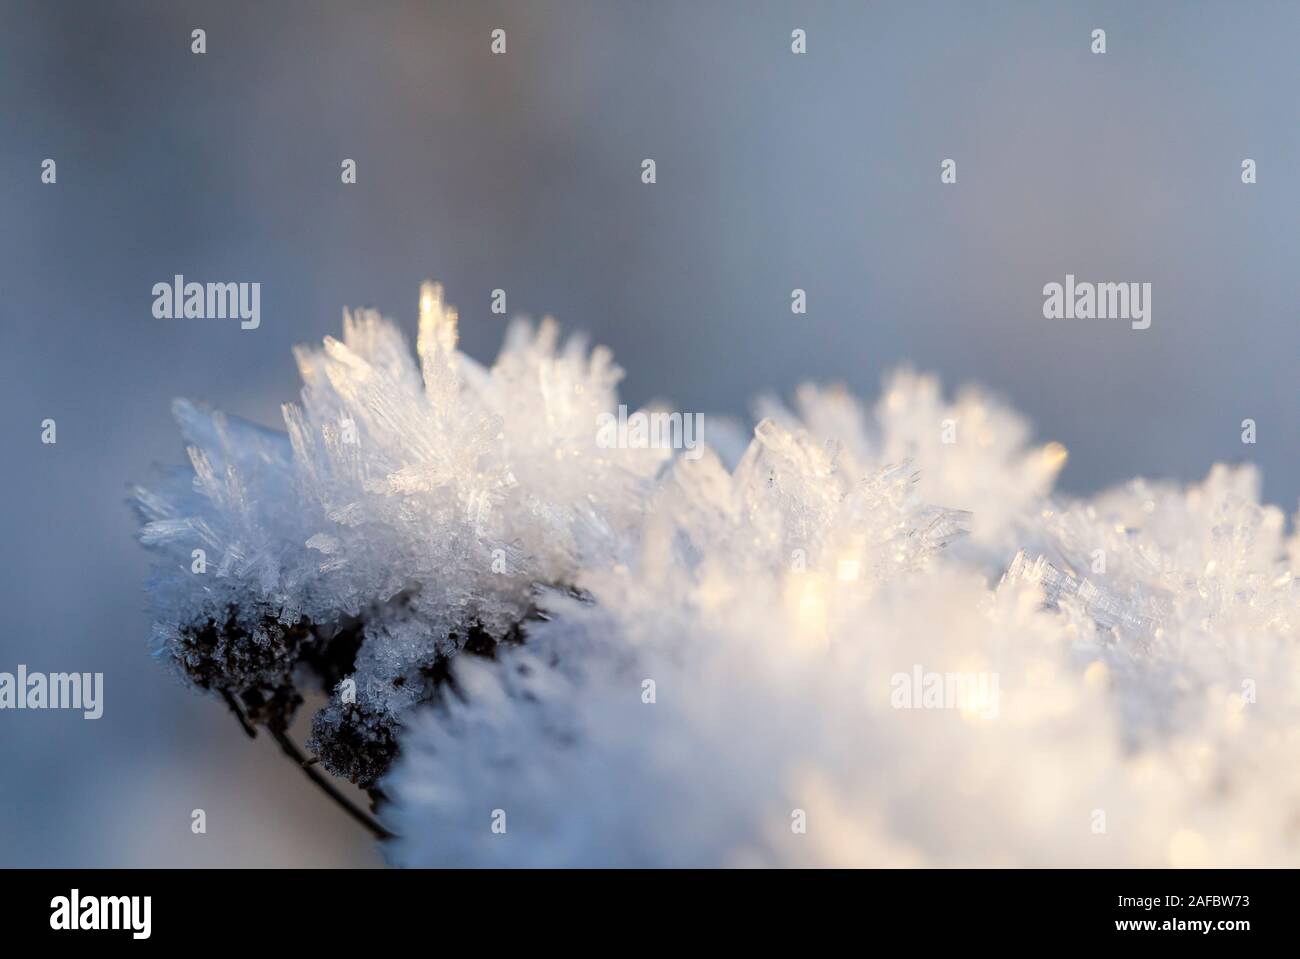 Closeuo of ice cristals on a plant at winter Stock Photo